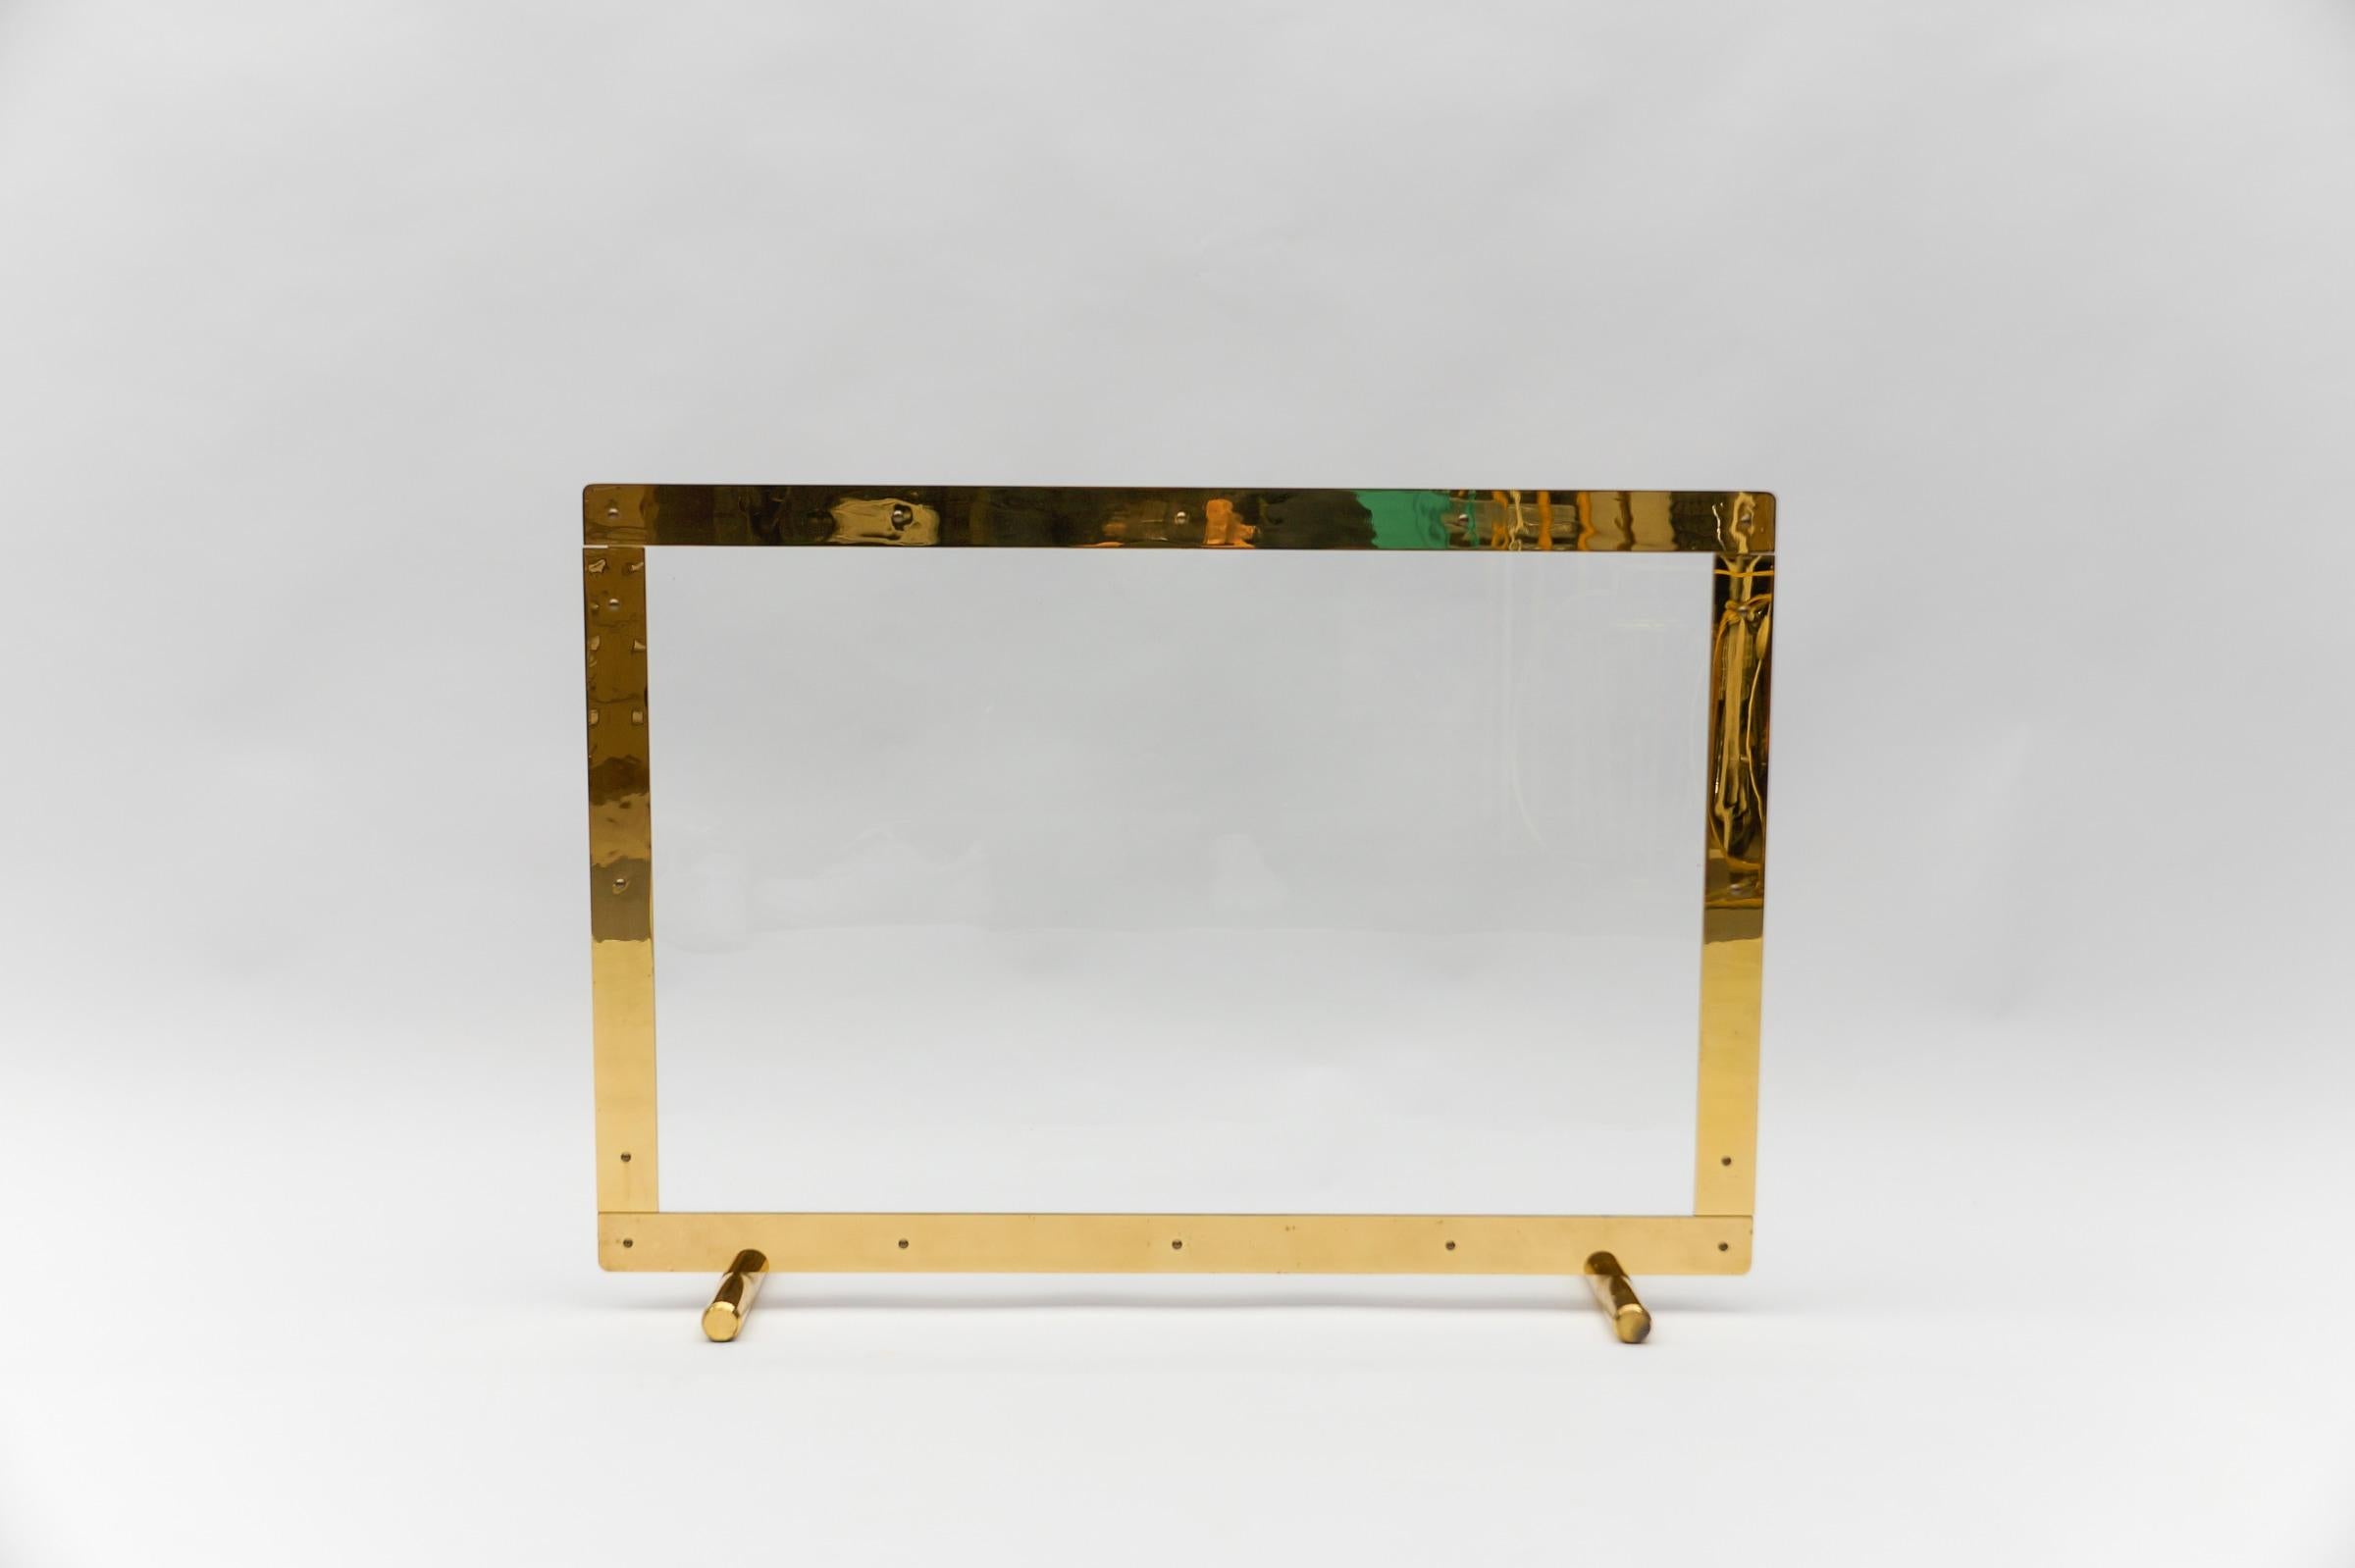 Elegant Mid-Centutry Modern Fireplace Screen in Gold and Glass, 1970s Italy In Good Condition For Sale In Nürnberg, Bayern